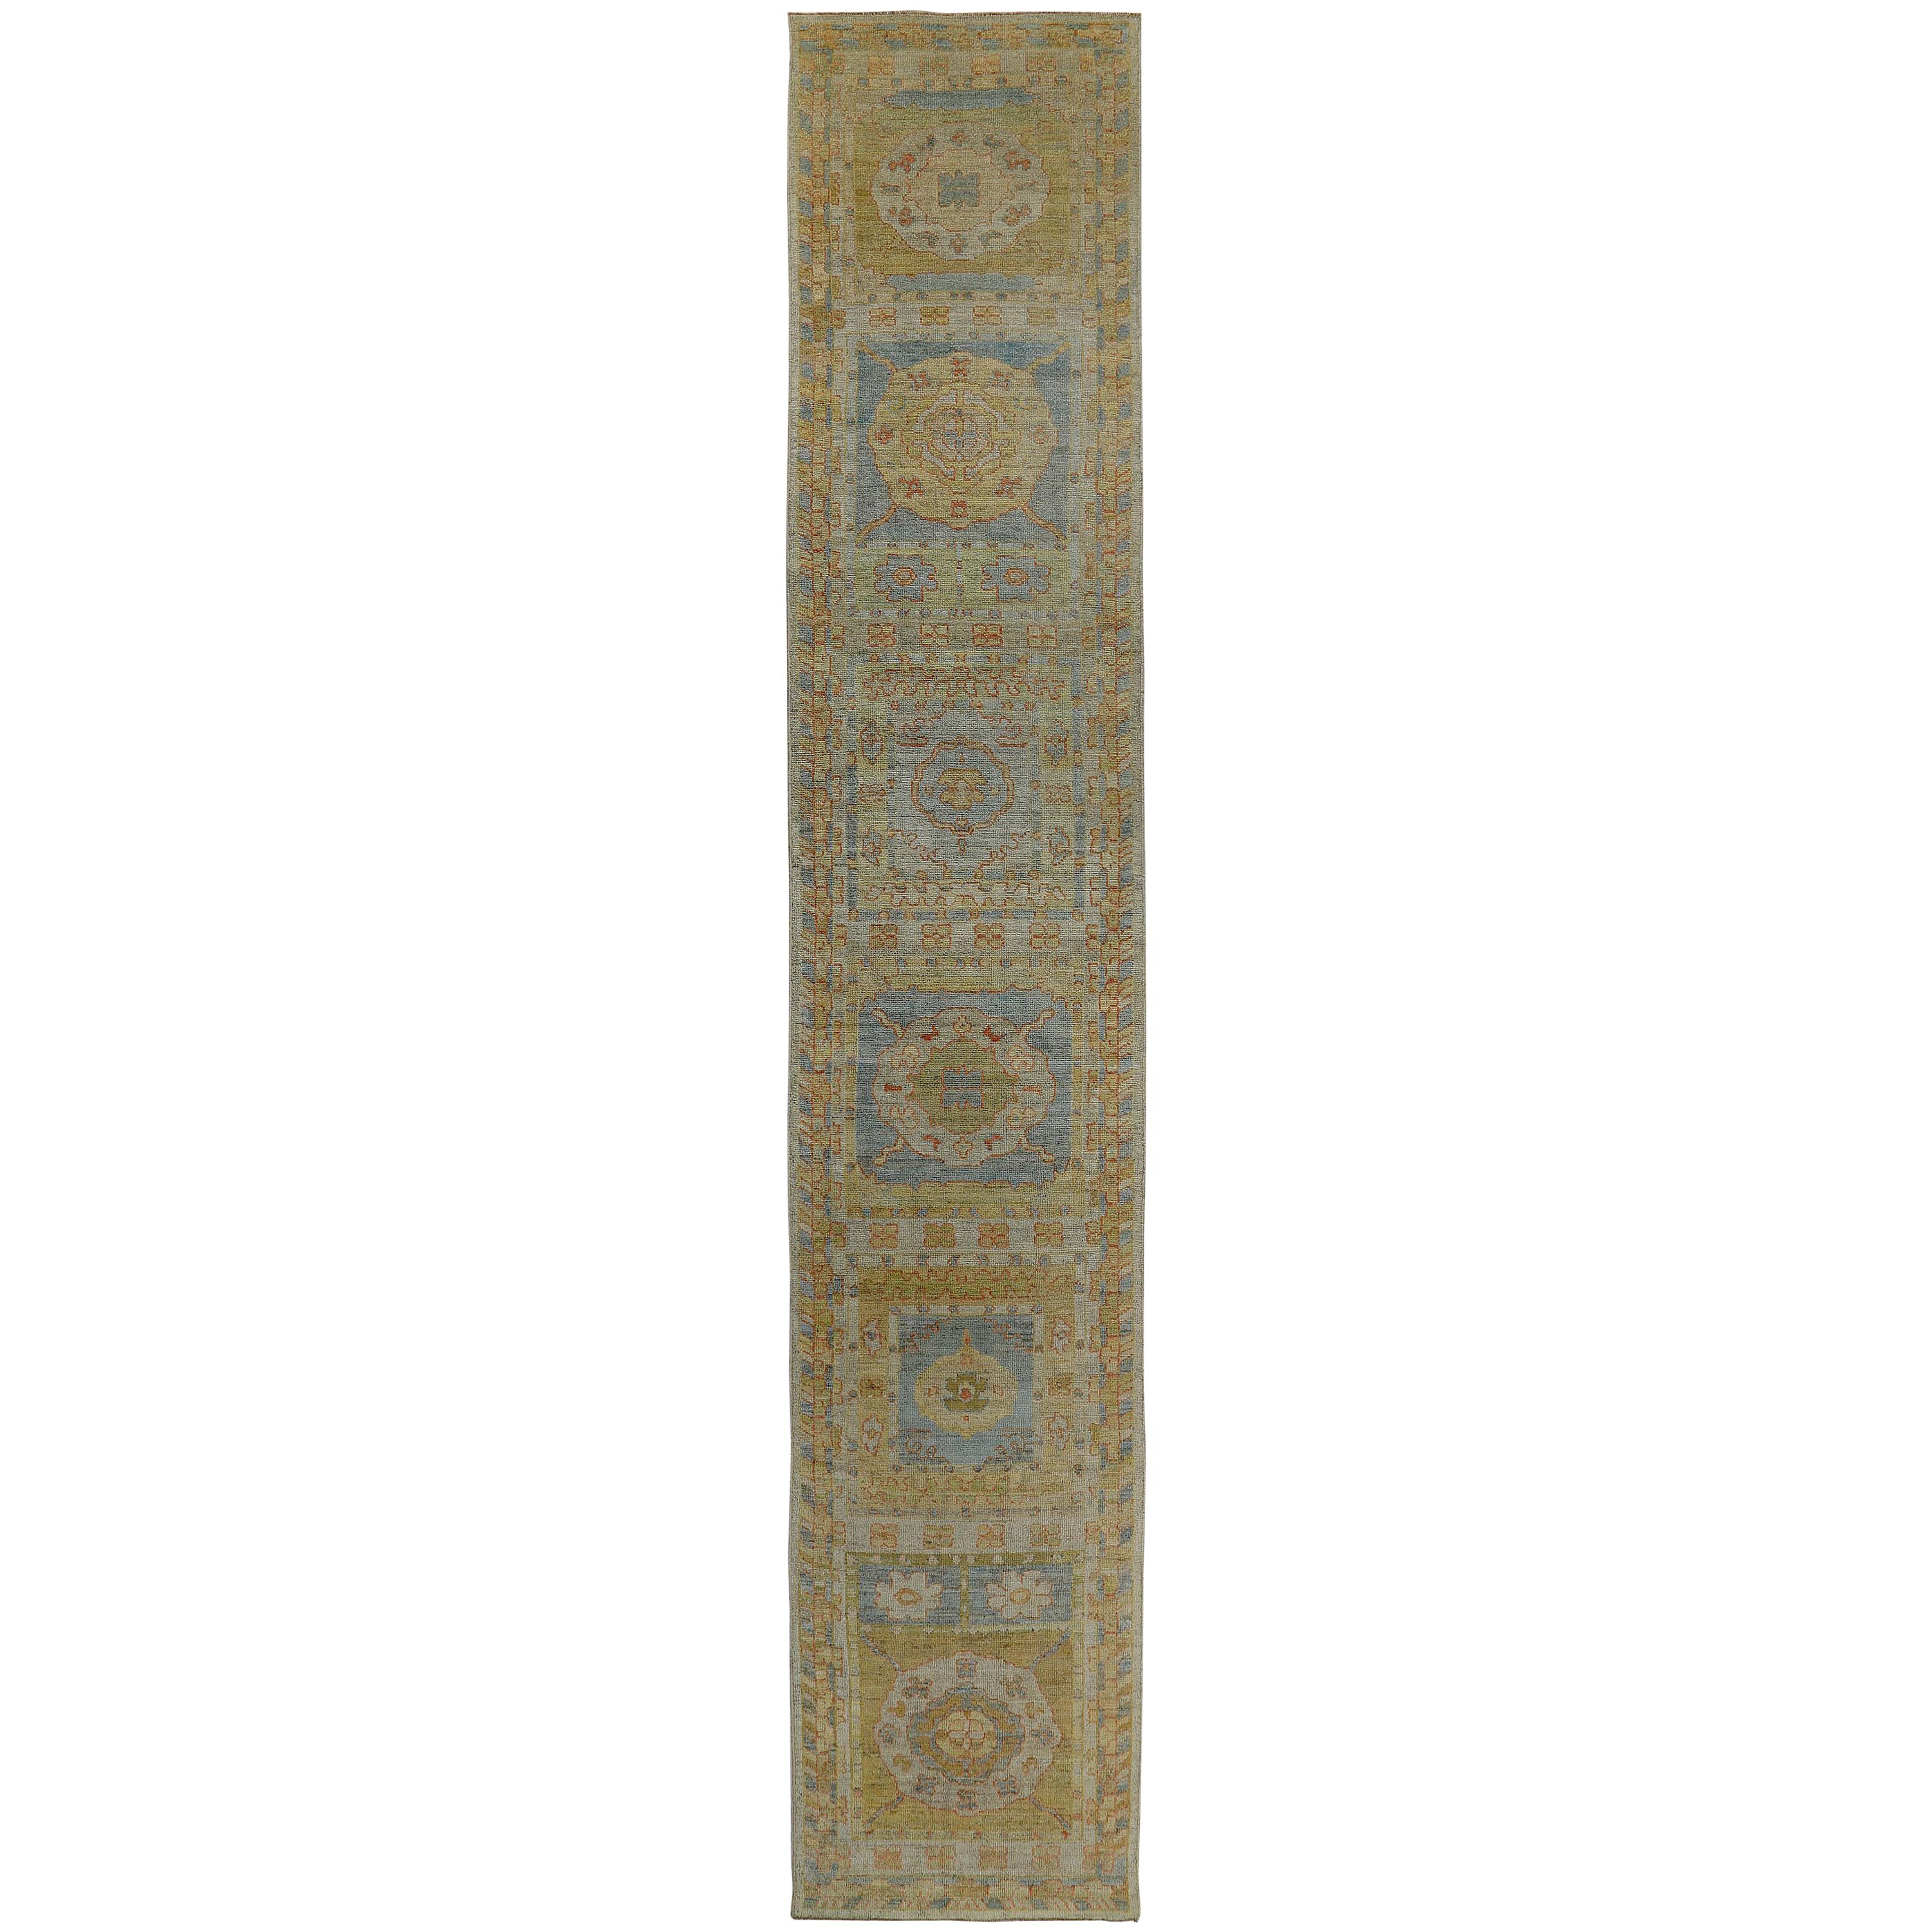 New Turkish Oushak Runner Rug with Blue and Green Floral Details on Yellow Field